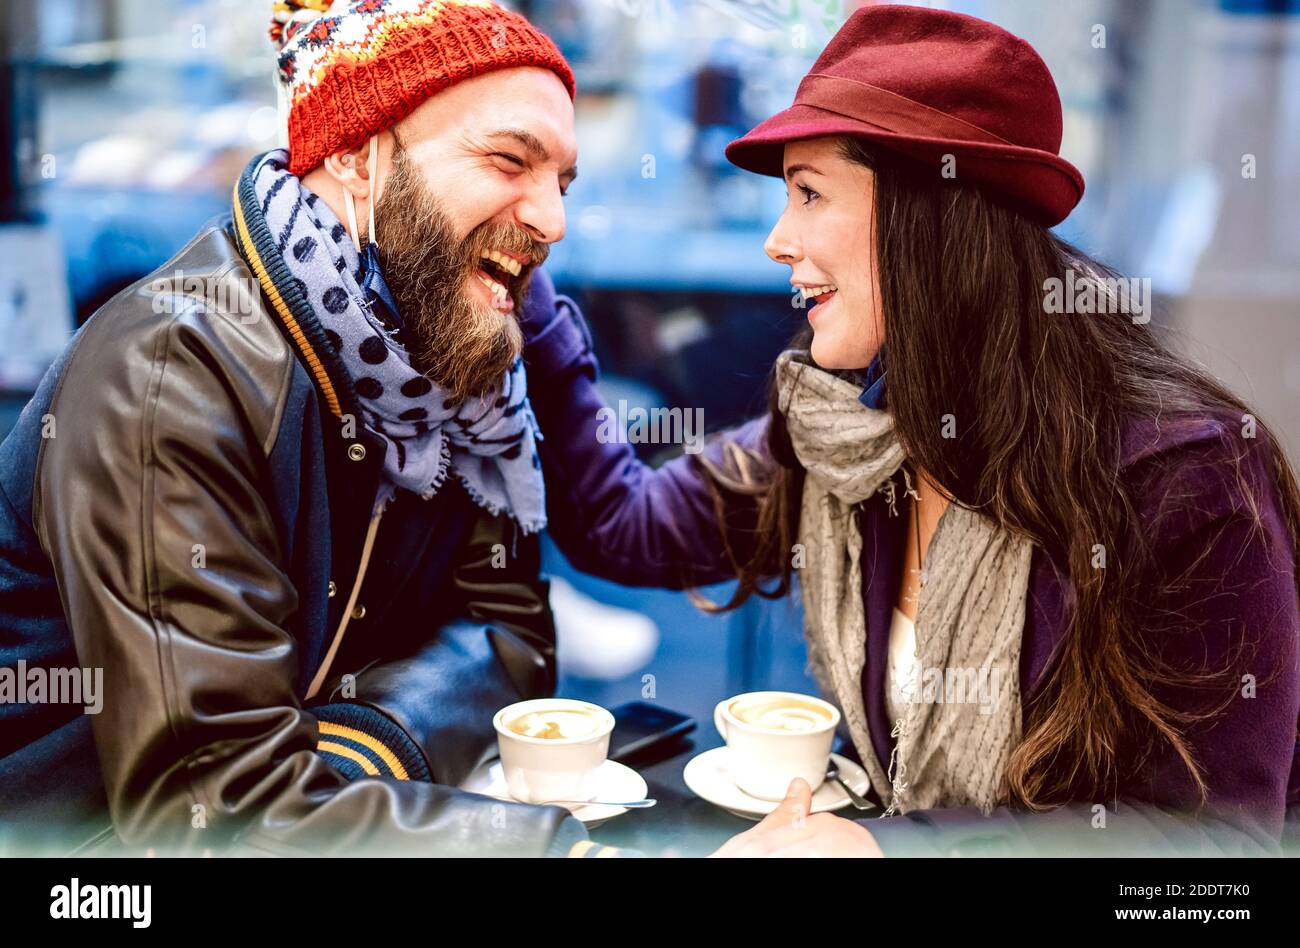 Happy people talking and having fun together at bar cafeteria - Winter lifestyle concept with young couple on genuine mood drinking italian coffee Stock Photo